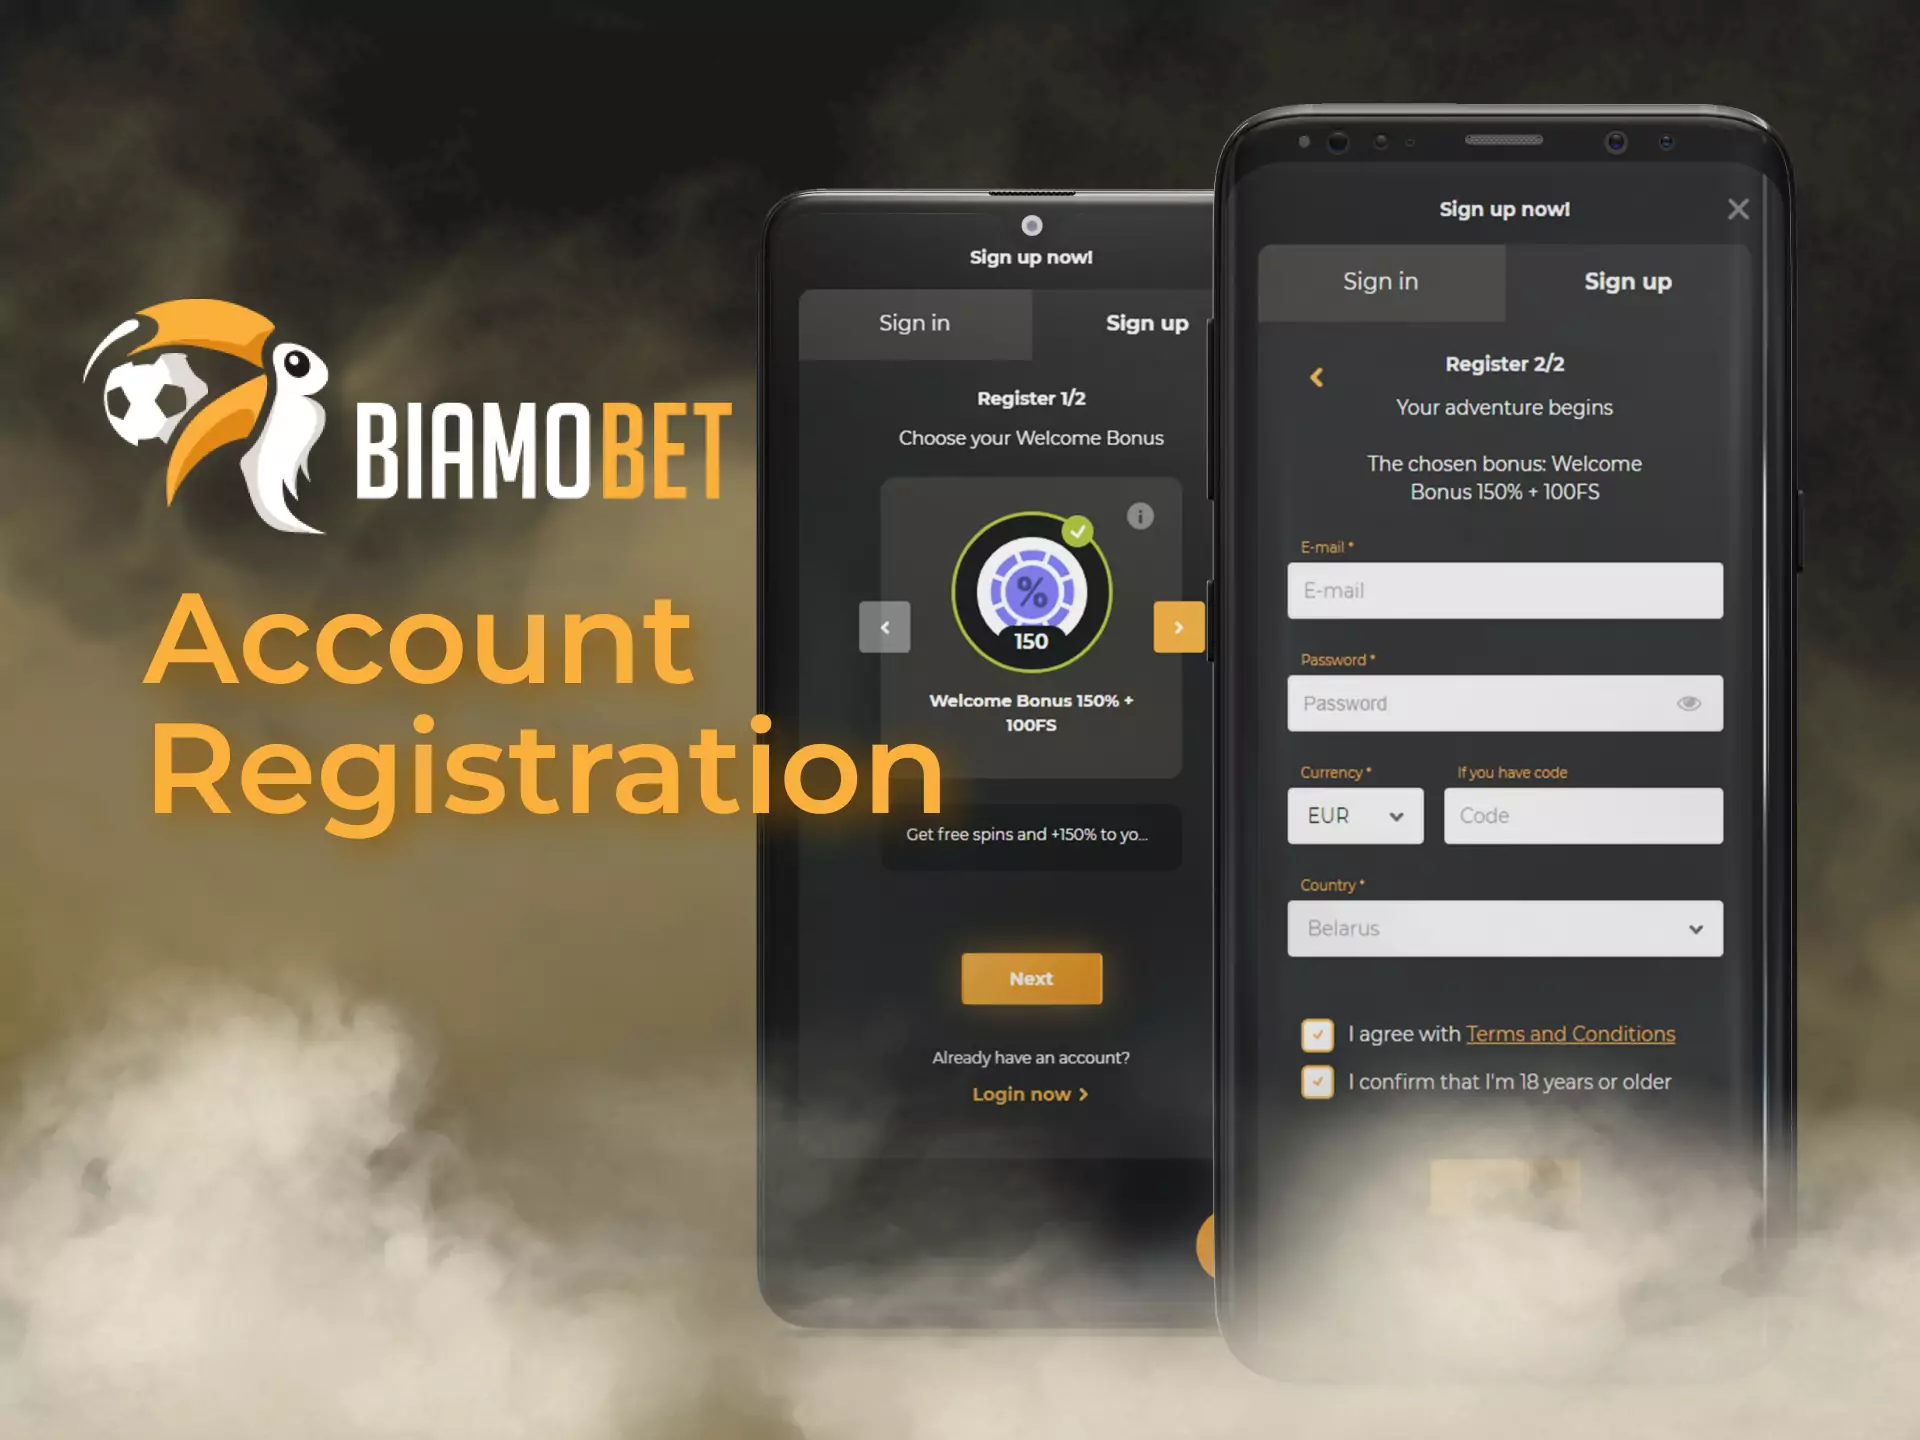 To start betting, you need to create an account on the Biamobet mobile website or in the app.